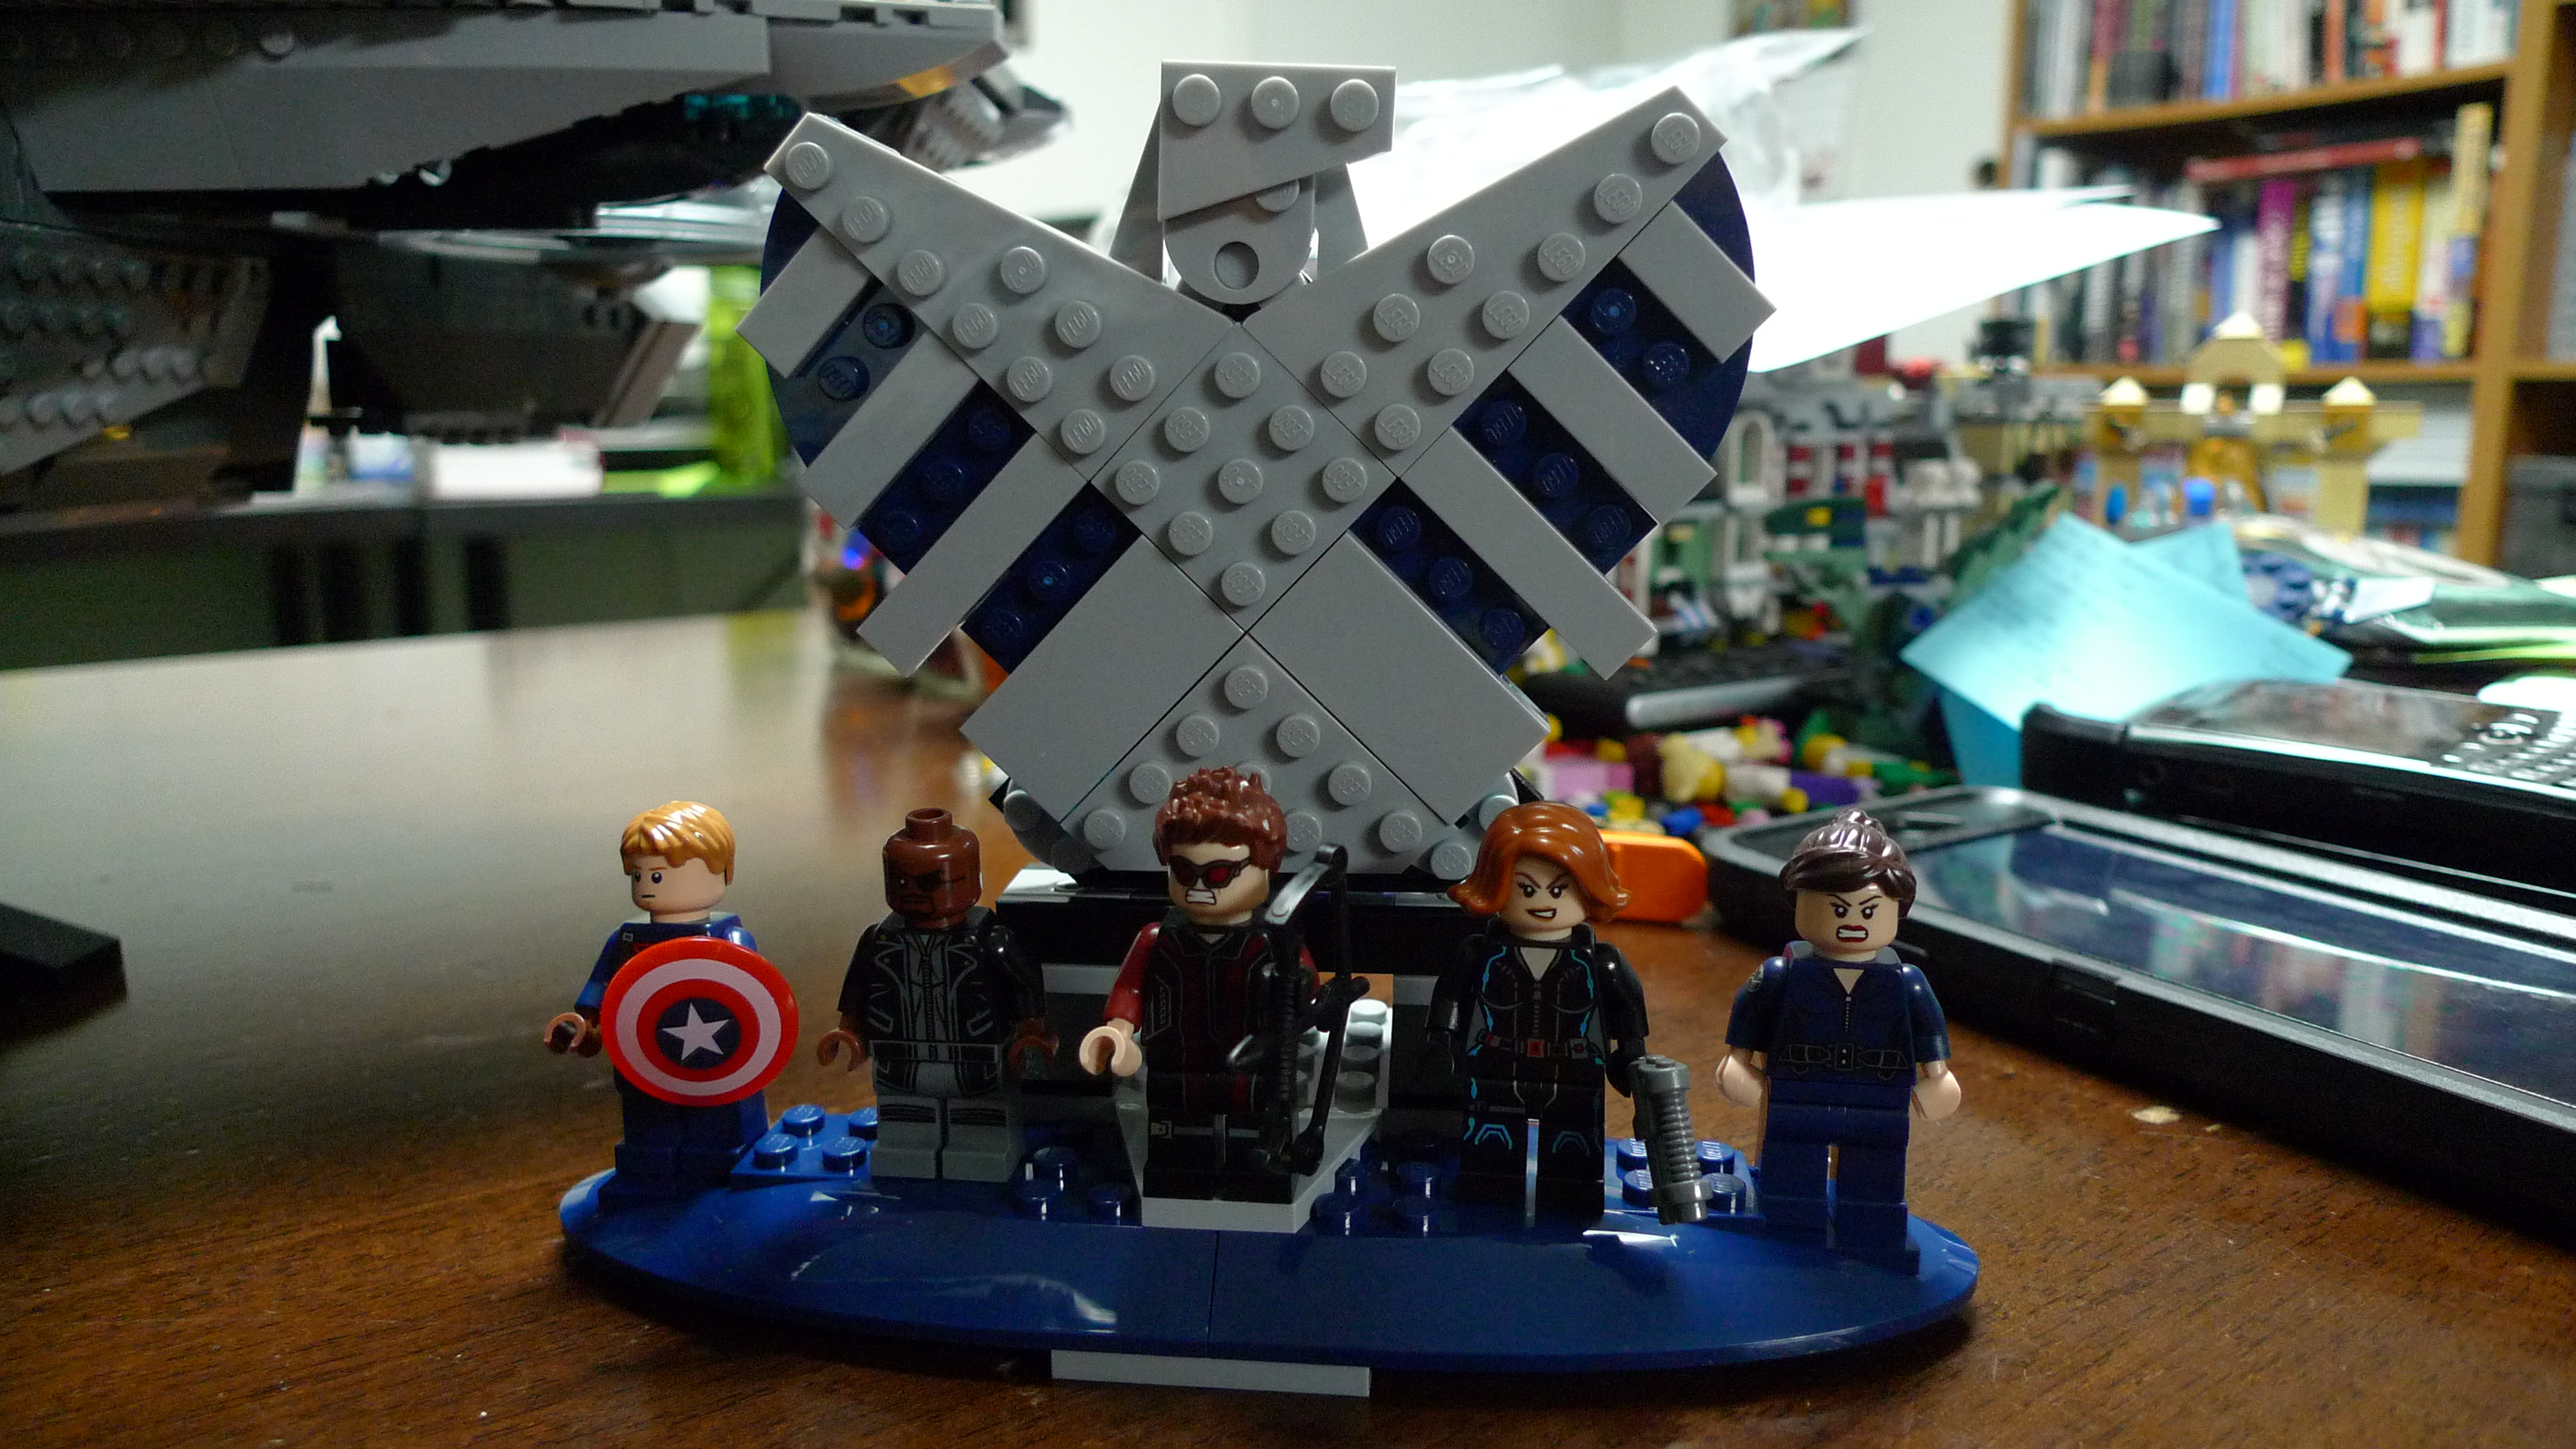 LEGO S.H.I.E.L.D. Helicarrier Review by The Allergy Chef